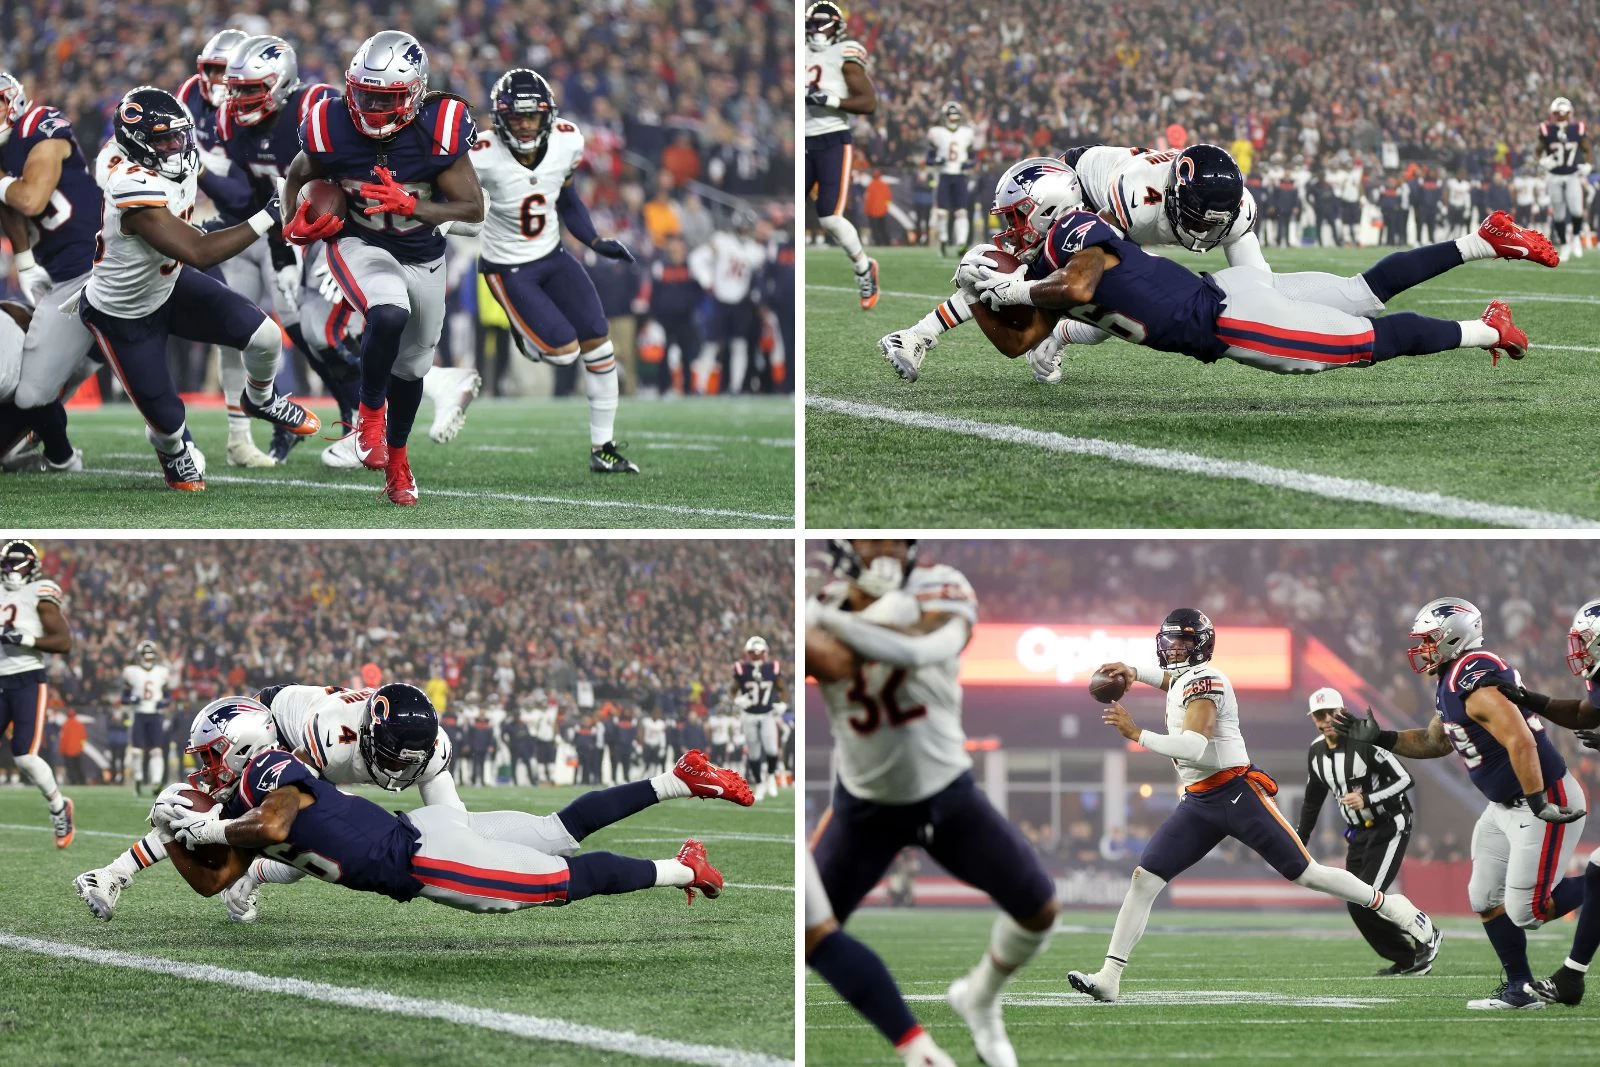 Look: 50 Photos From the Patriots' Tough Loss to the Bears